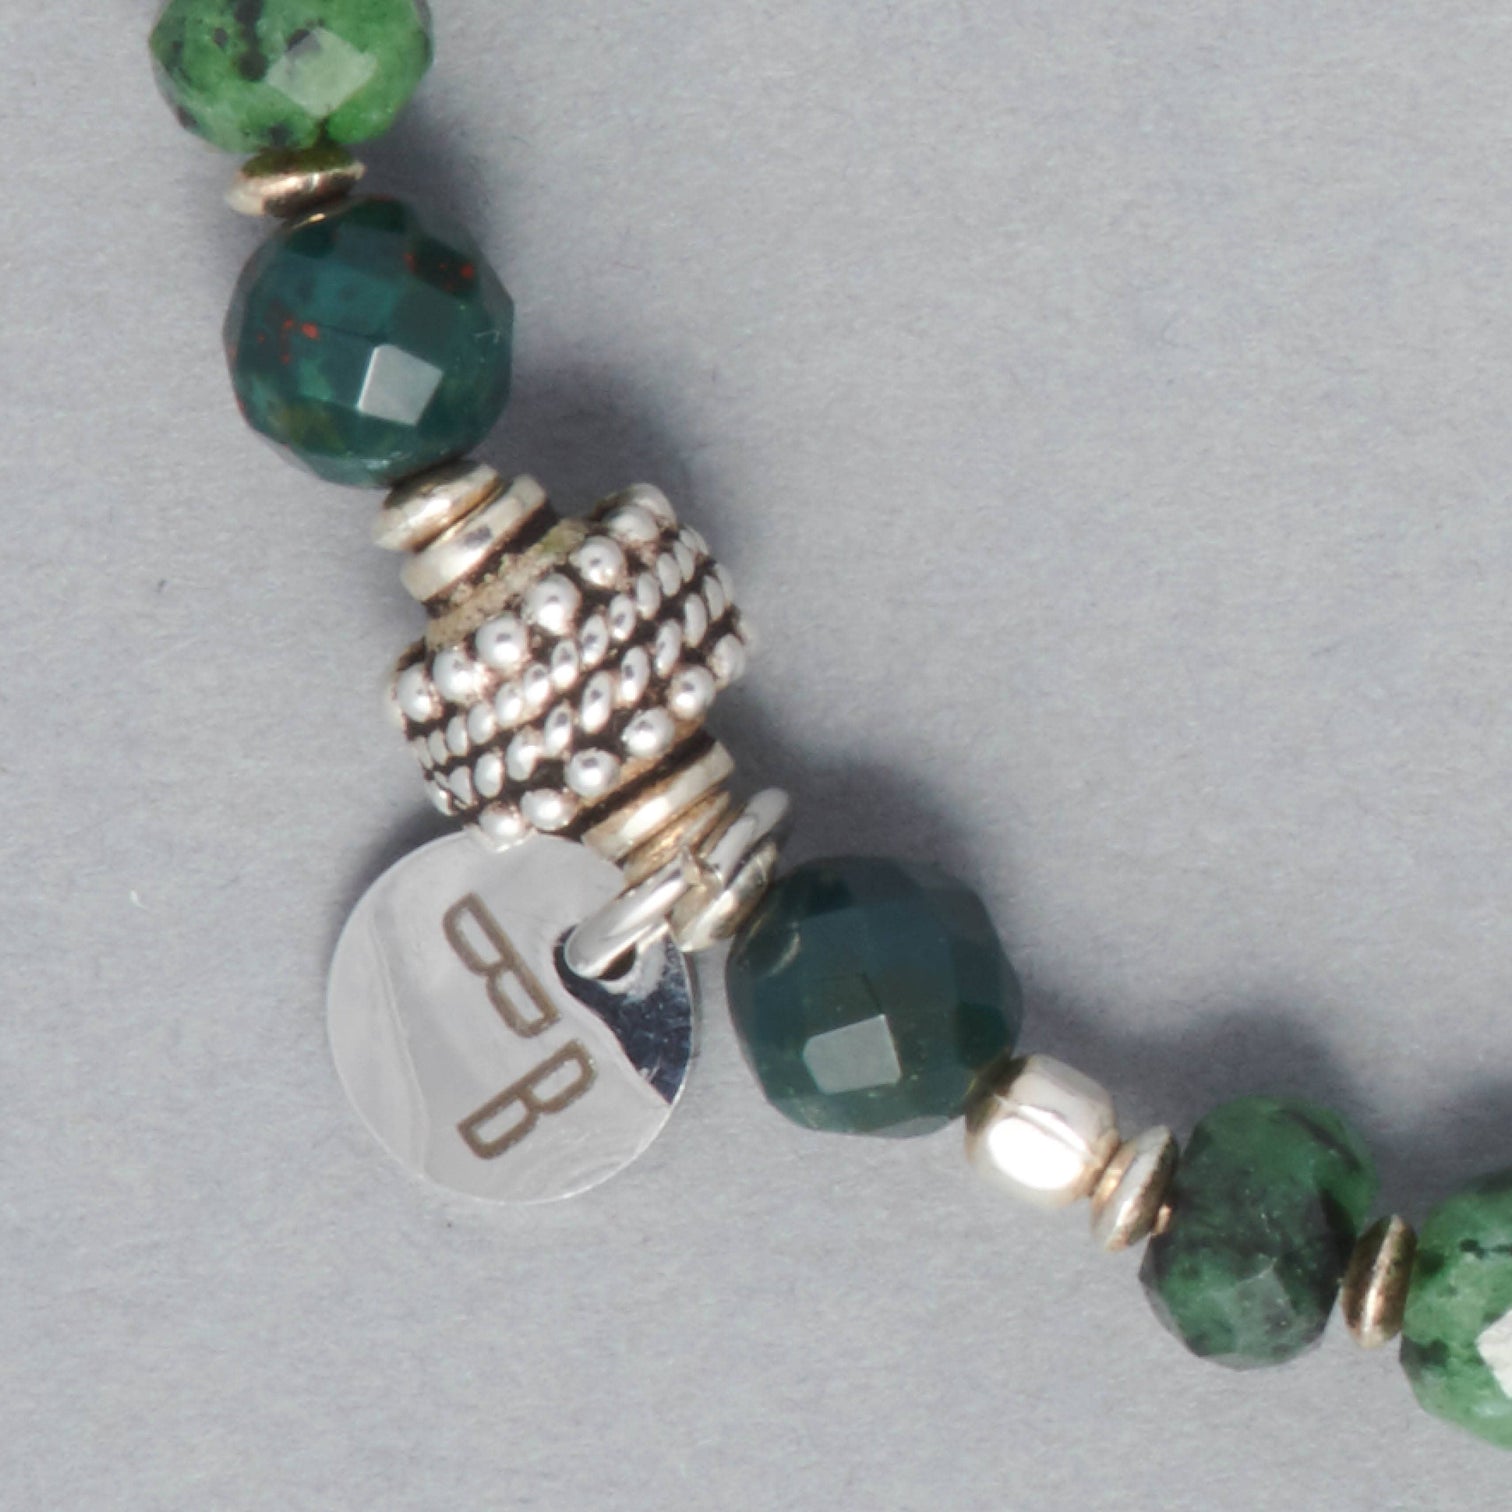 Detail shot of the Robin Bracelet made with Rubin Zoisite, Heliotrope and Sterling Silver Elements. 